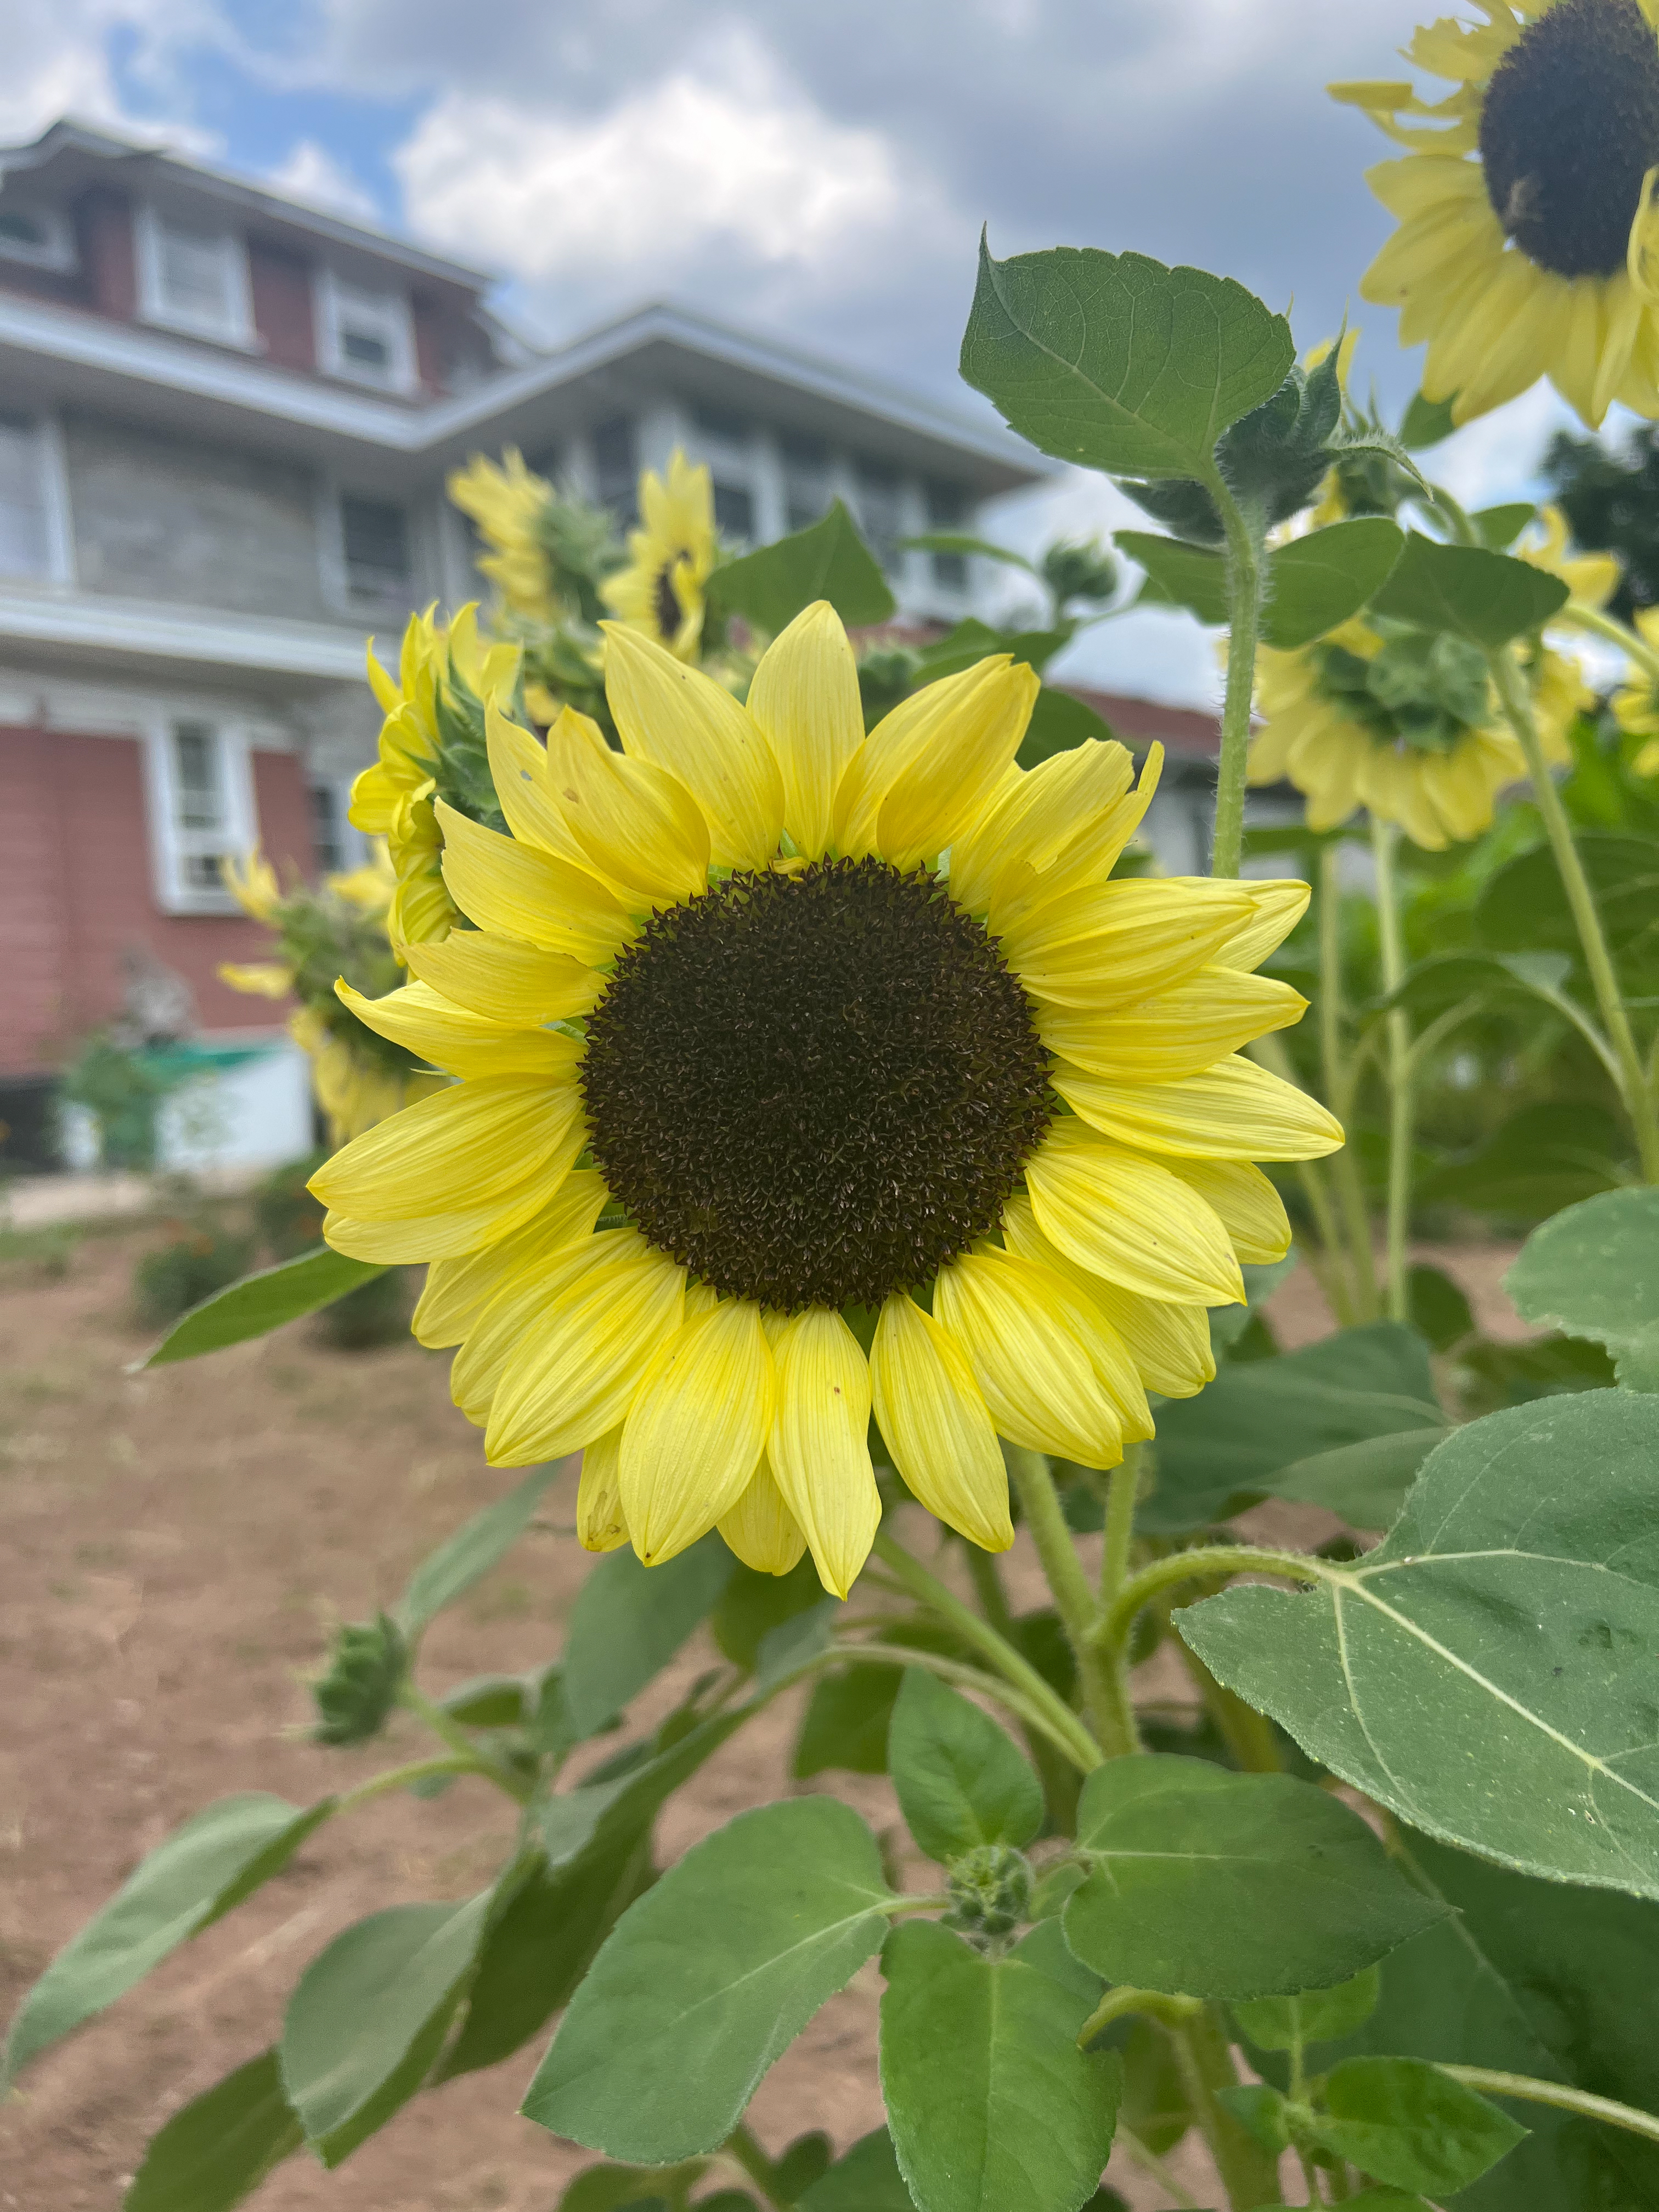 Sunflower planted by members of the community center.